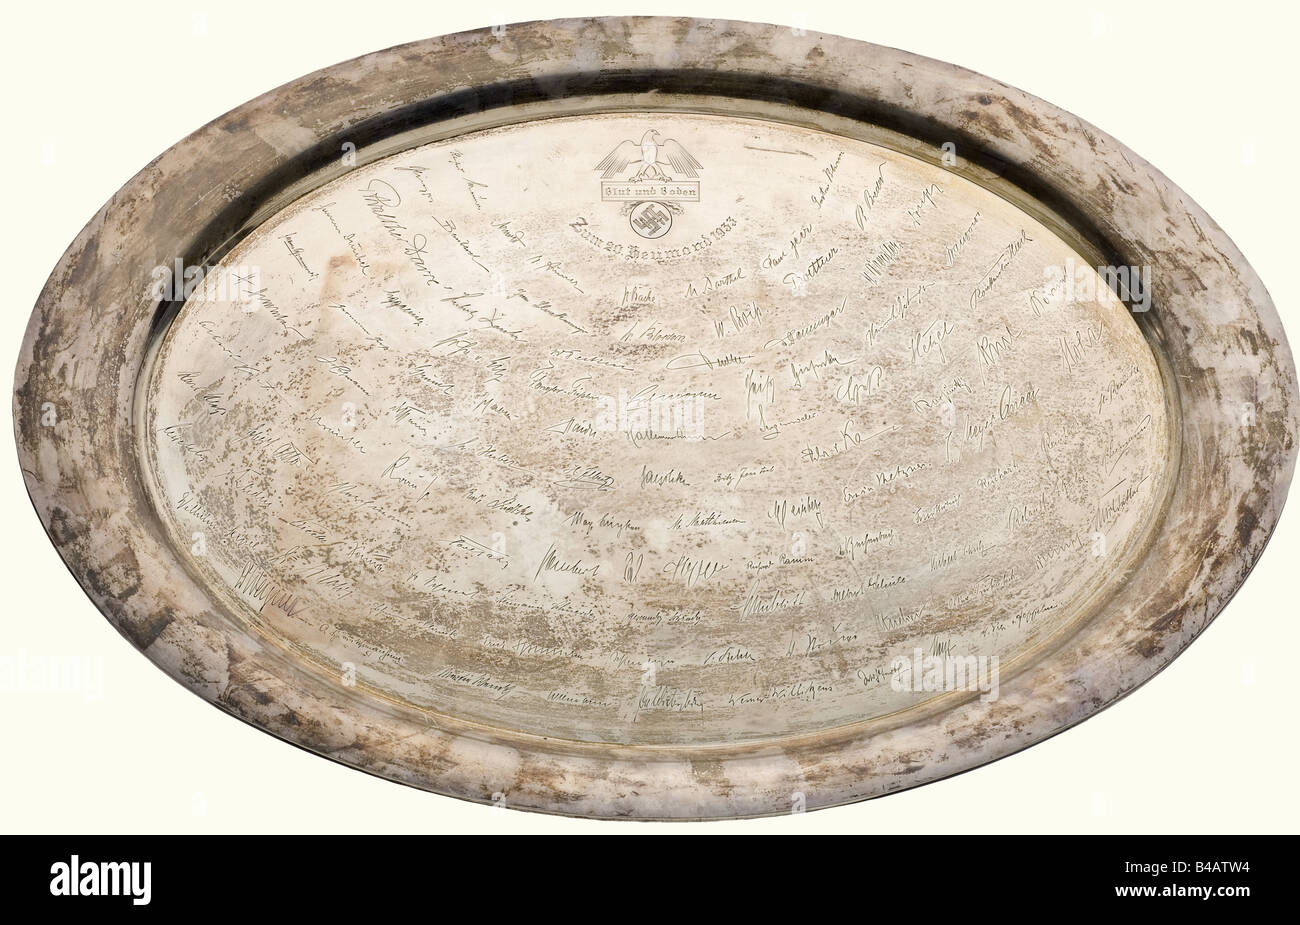 A silver platter of the Reichsnährstand to its constitutional session on the 20th of the Hay Month (July) 1933., Oval shape, engraved with 104 signatures and the emblem of the Reichsnährstand and the date with the peasant term 'Heumond' for July. On the bottom the engraved silversmith's signature 'Lutz & Weiß Pforzheim', and the hallmark '835S' as well as 'LW'. 65 x 4 historic, historical, 1930s, 1930s, 20th century, NS, National Socialism, Nazism, Third Reich, German Reich, Germany, German, National Socialist, Nazi, Nazi period, fascism, object, objects, still, Stock Photo